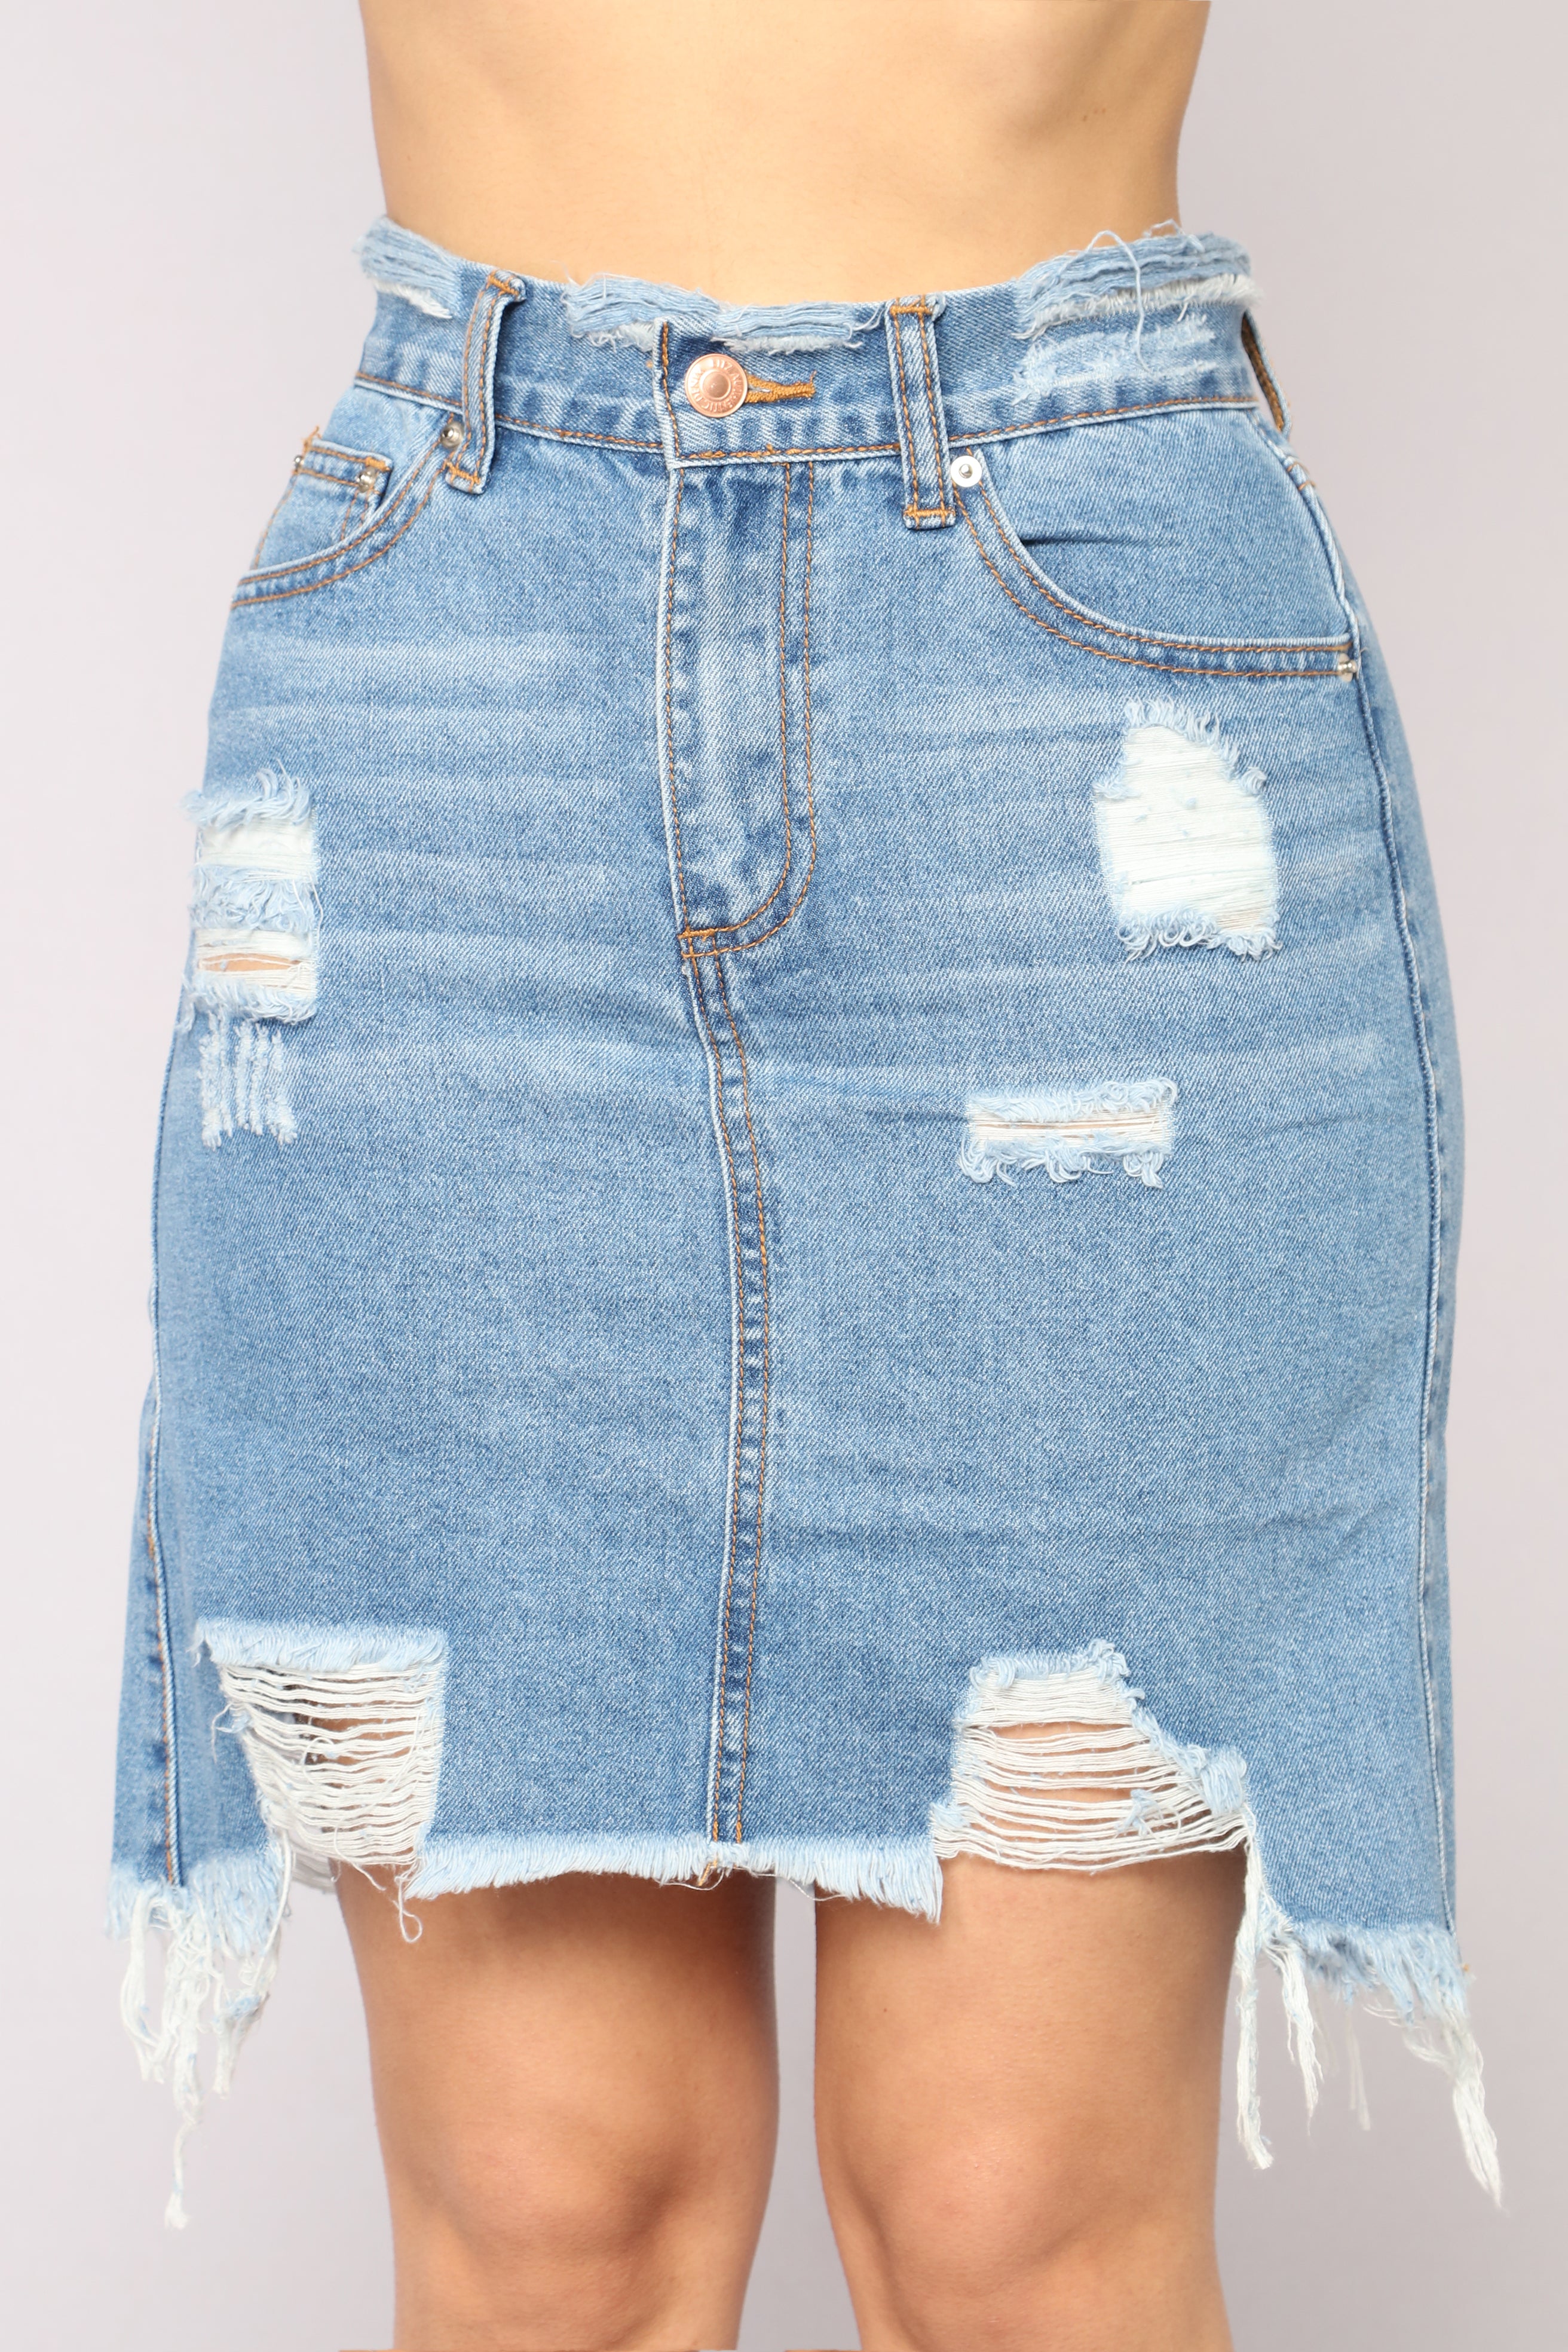 distressed jeans skirt